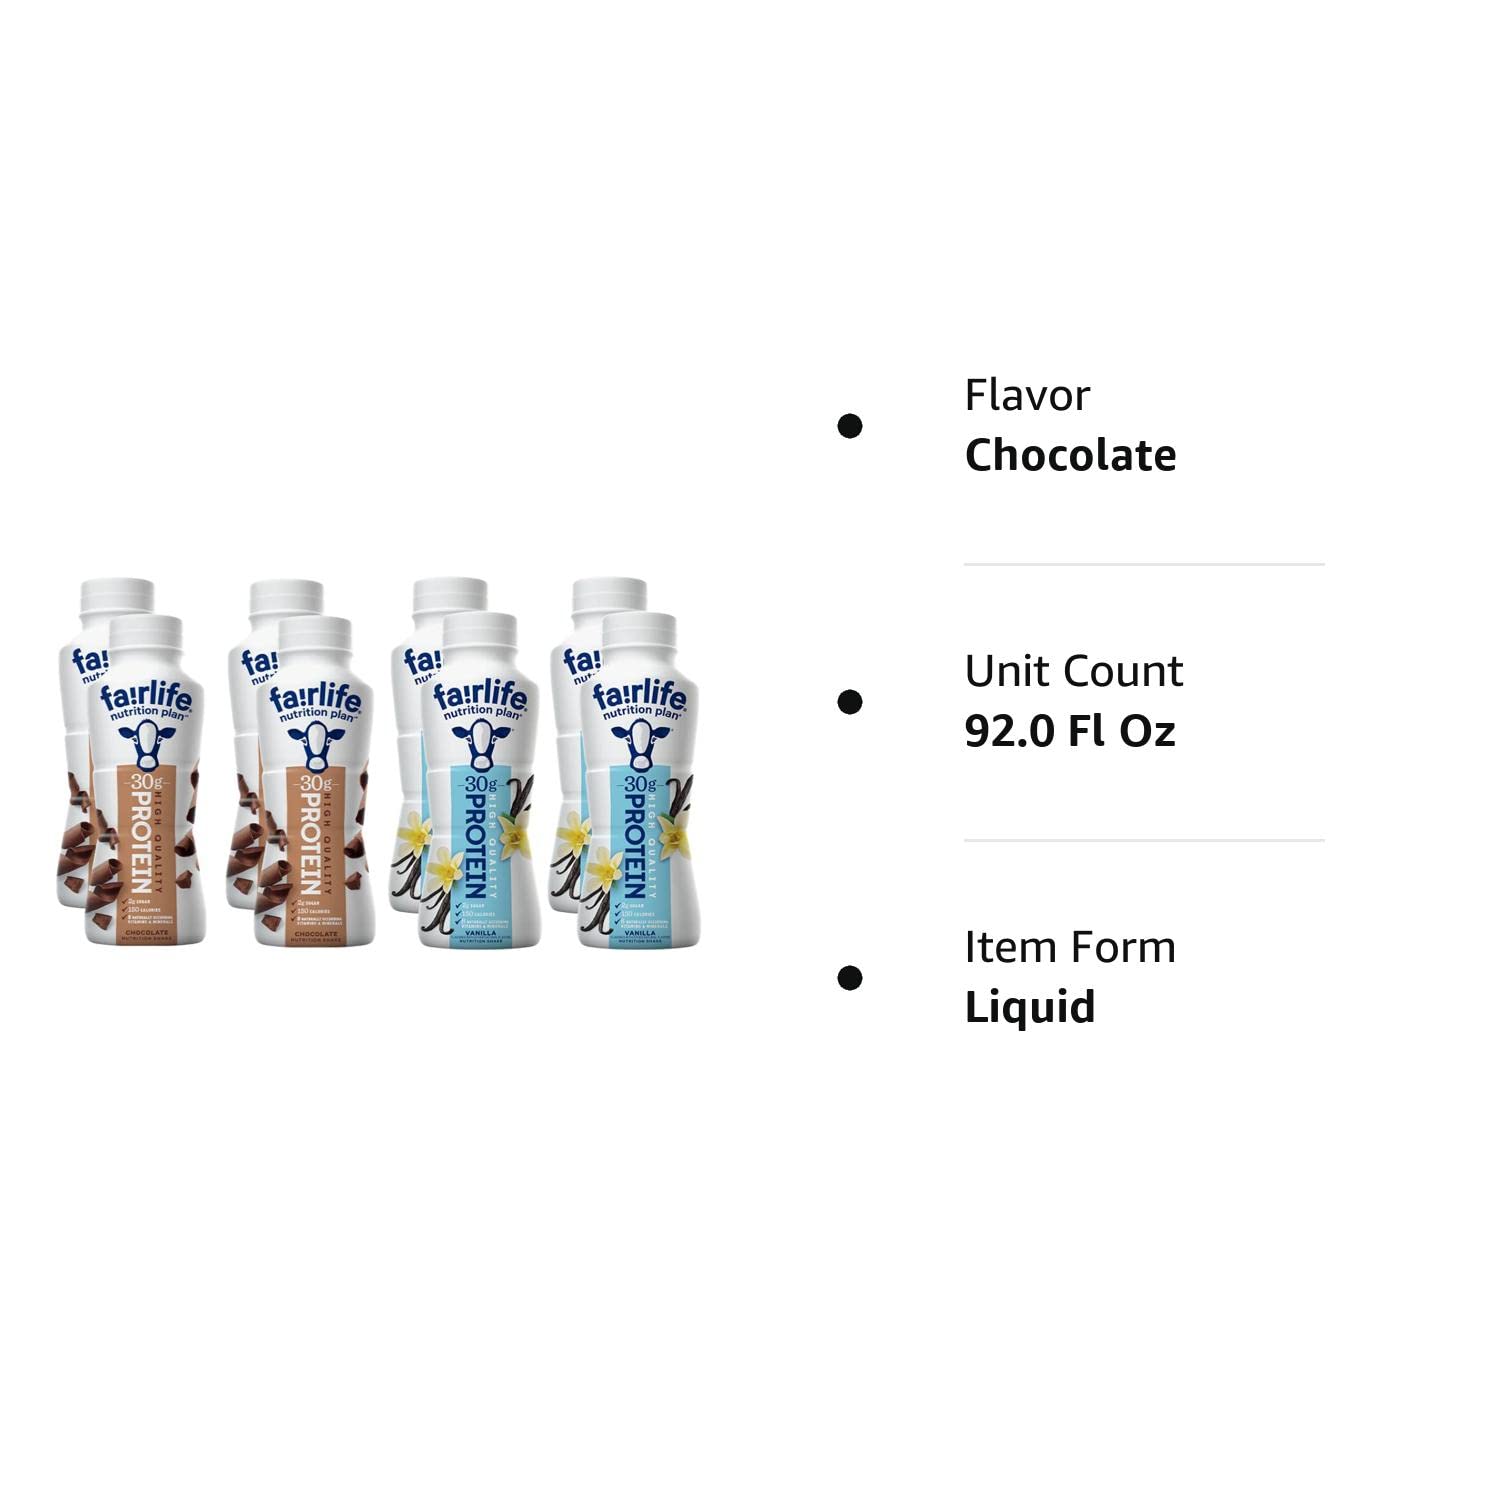 Wholesale prices with free shipping all over United States Fairlife Nutrition Plan High Protein Shake Variety Pack Sampler - Chocolate & Vanilla - 11.5 Fl Oz (8 Pack) - Steven Deals